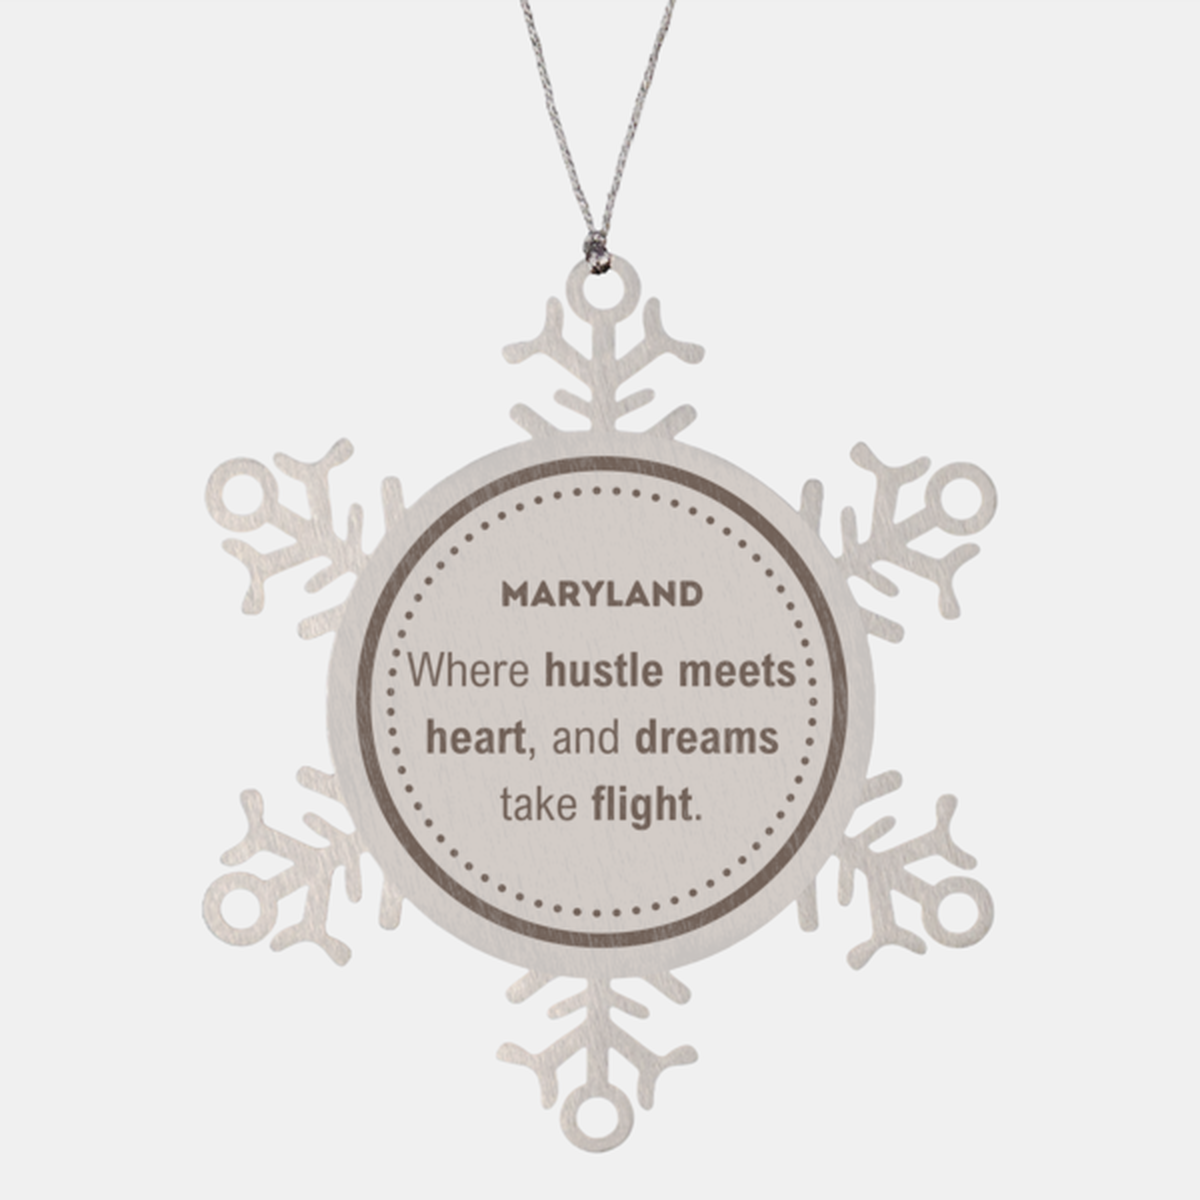 Maryland: Where hustle meets heart, and dreams take flight, Maryland Ornament Gifts, Proud Maryland Christmas Maryland Snowflake Ornament, Maryland State People, Men, Women, Friends